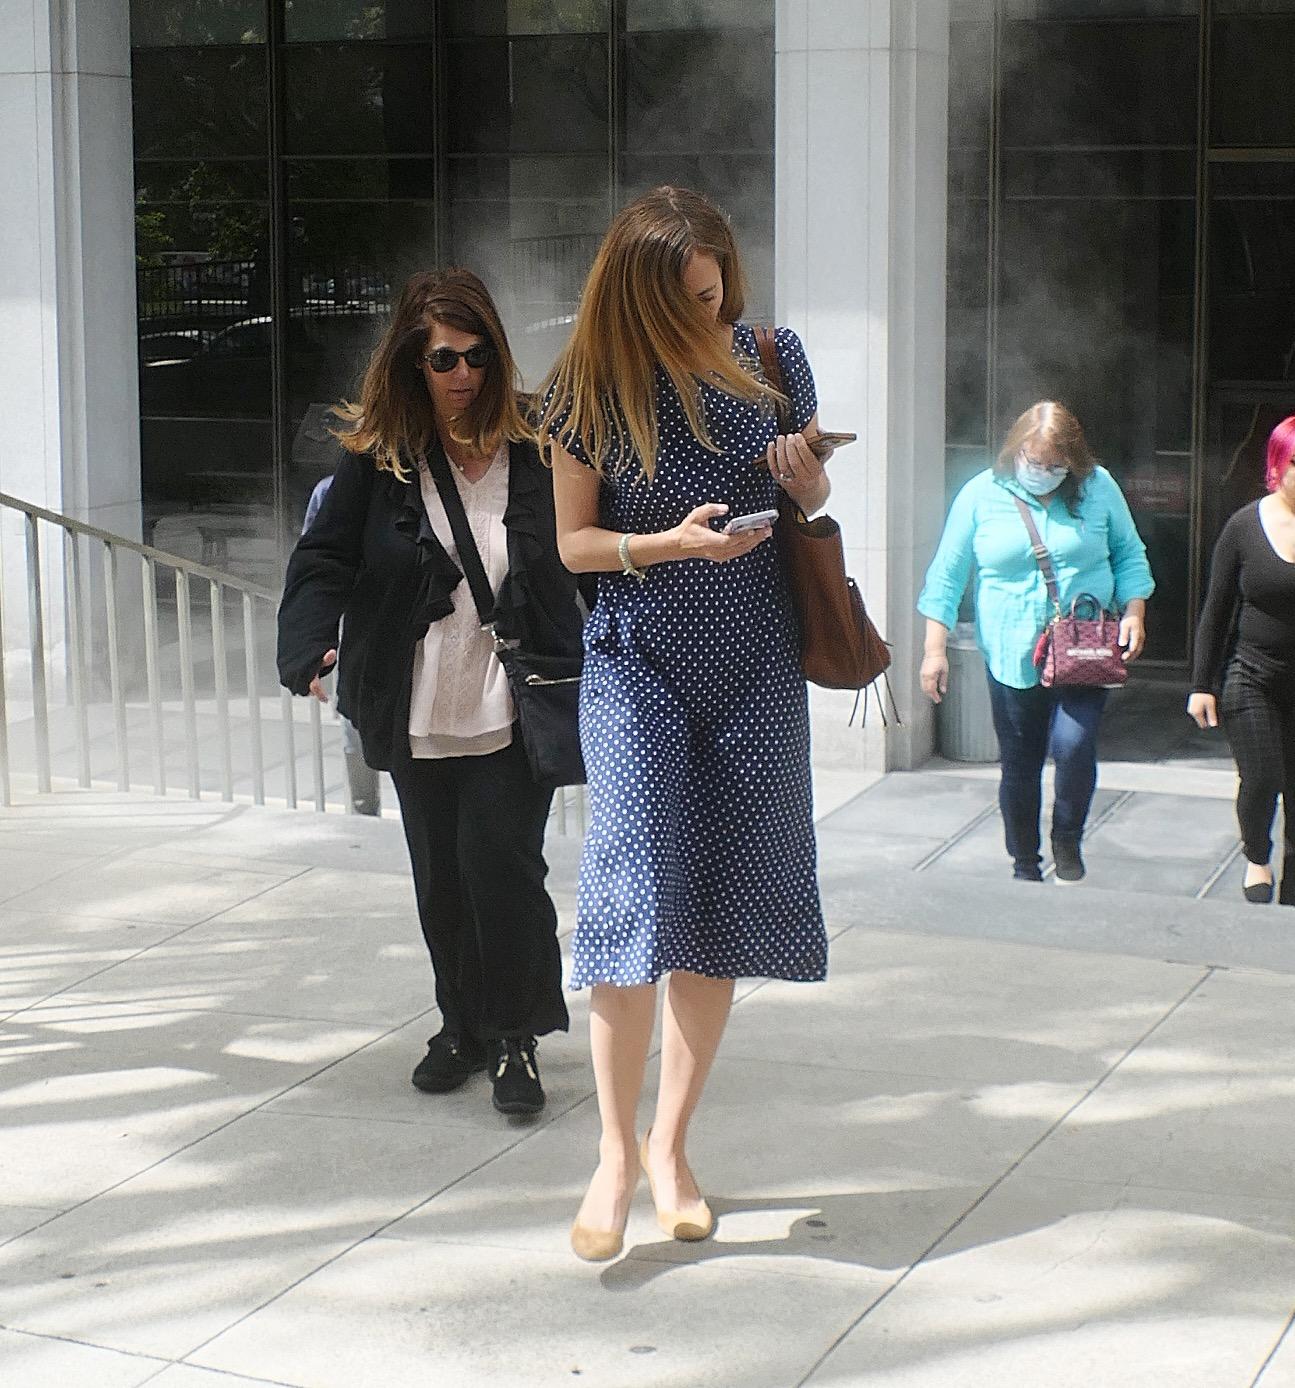 Bijou Phillips is seen leaving court after That '70s Show'' Danny Masterson was convicted of two counts of forcible rape.